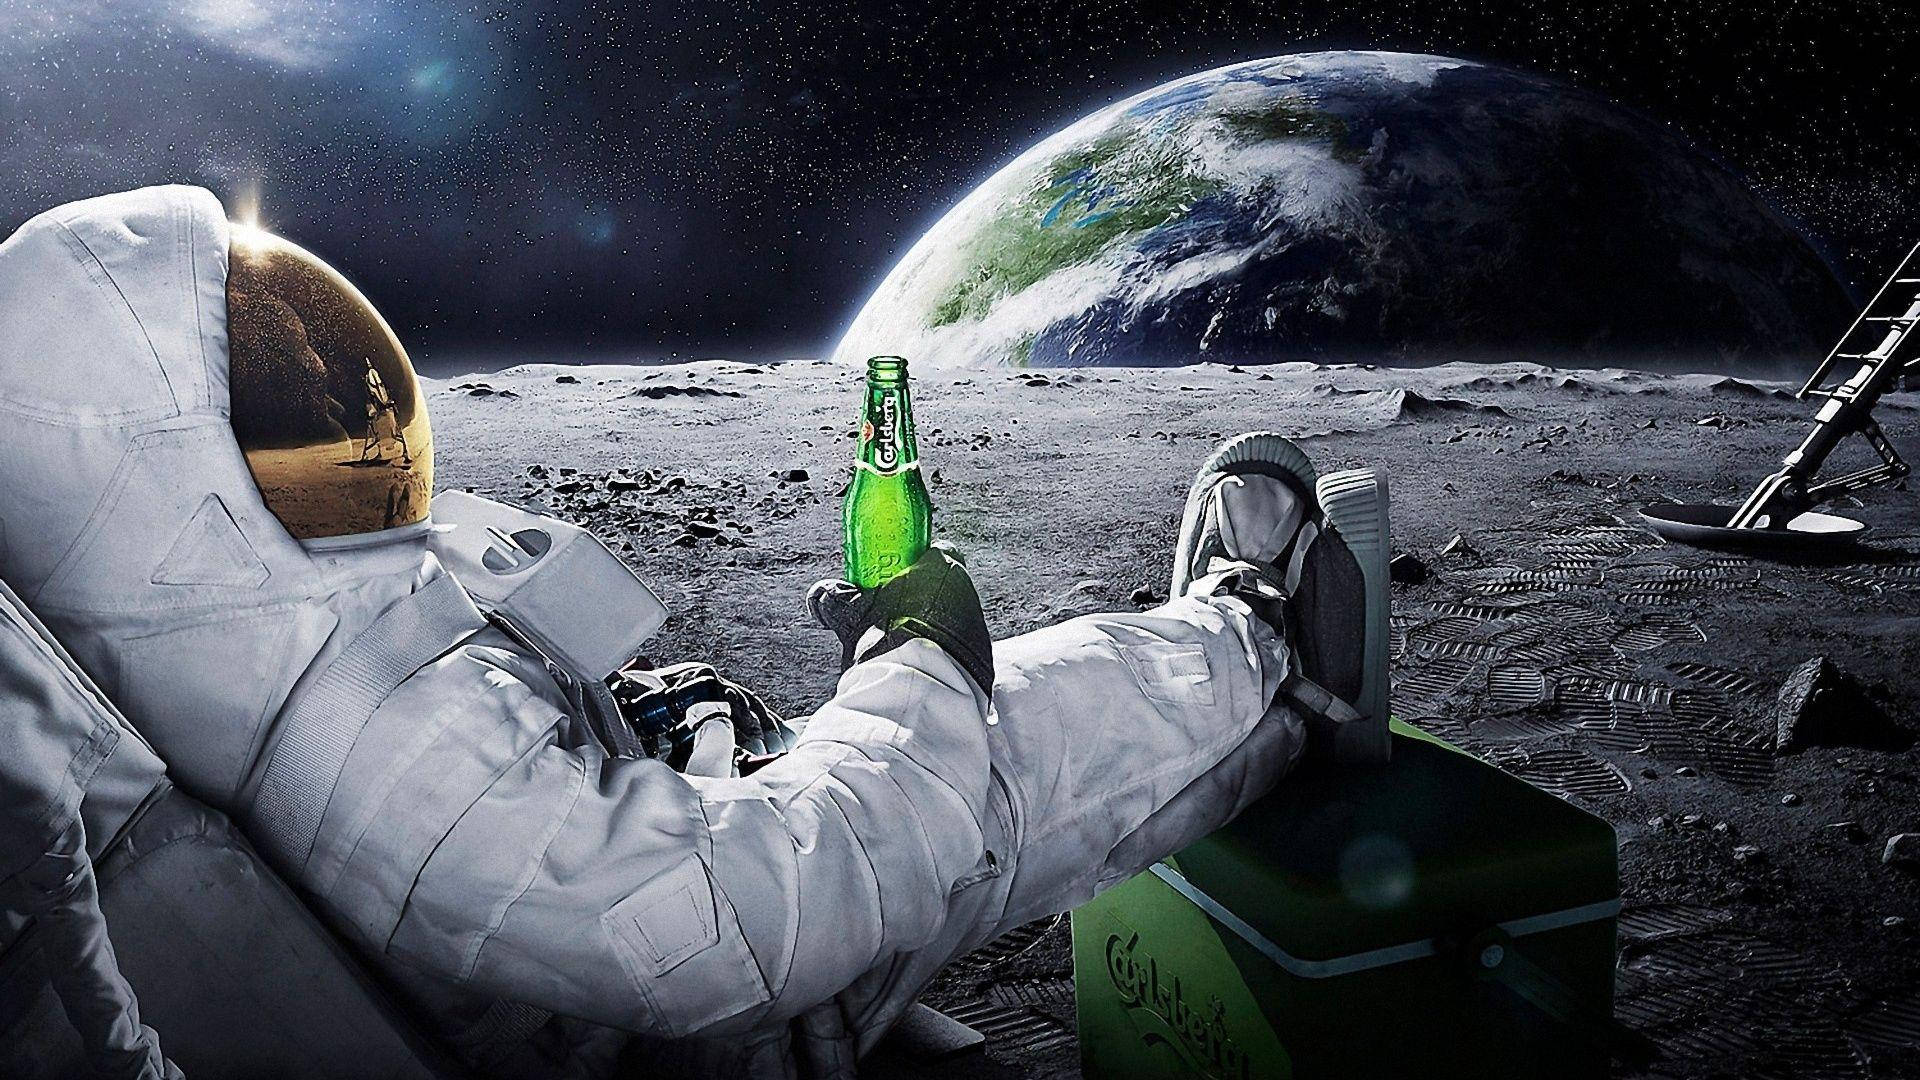 1080p Hd Astronaut Relaxing On Moon